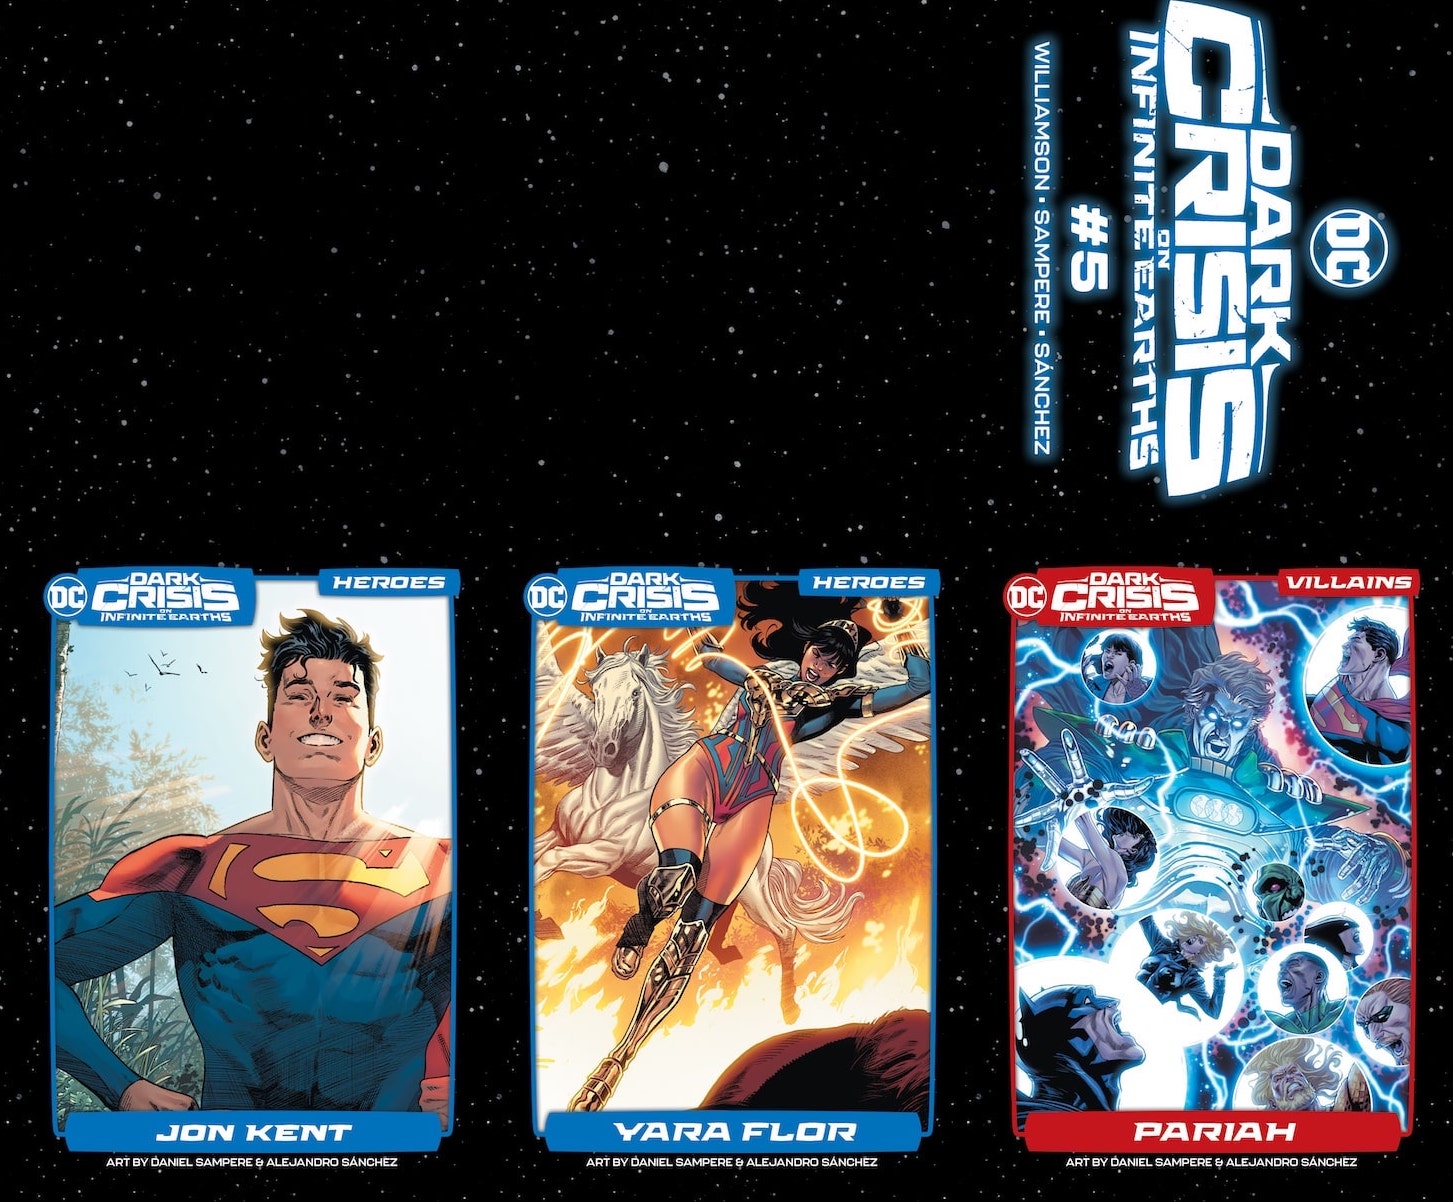 DC gets into trading cards with 'Dark Crisis on Infinite Earths' #5 card variants